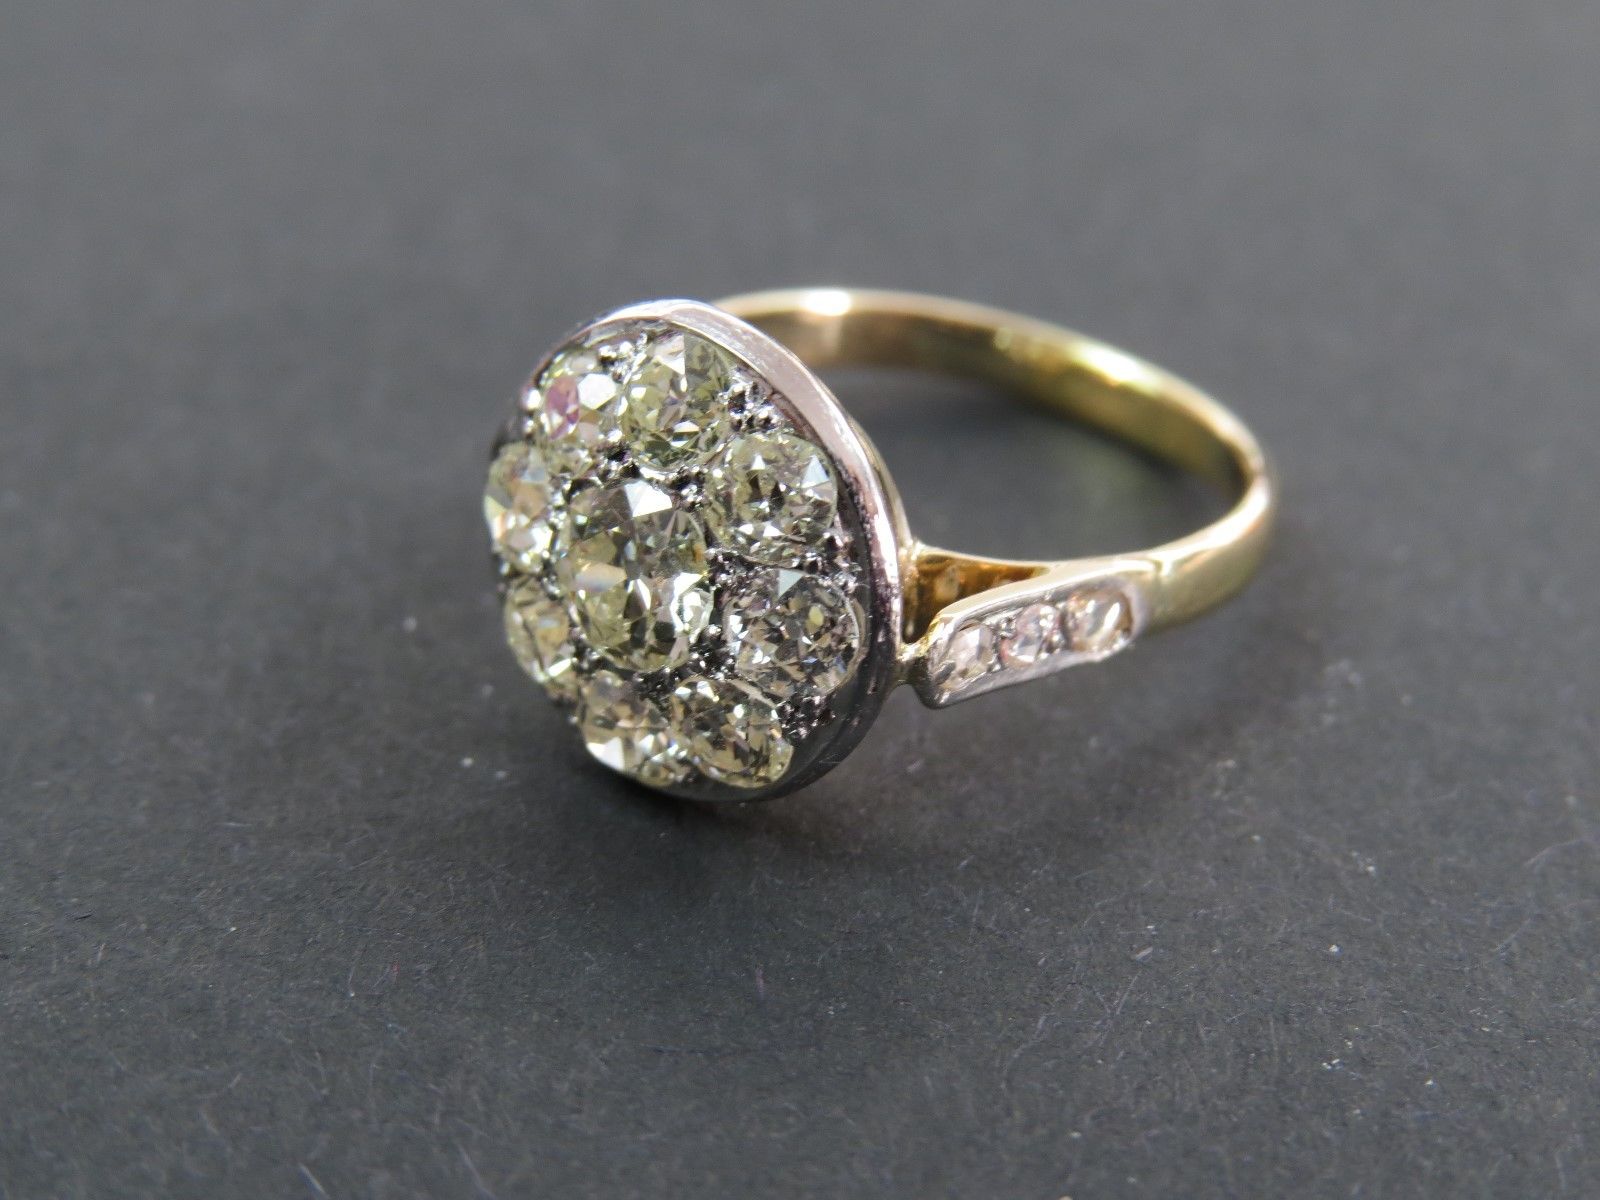 Withdrawn Lot Antique Edwardian 18ct Gold 1.3ct Diamond Cluster Ring C.1910 - Image 5 of 7